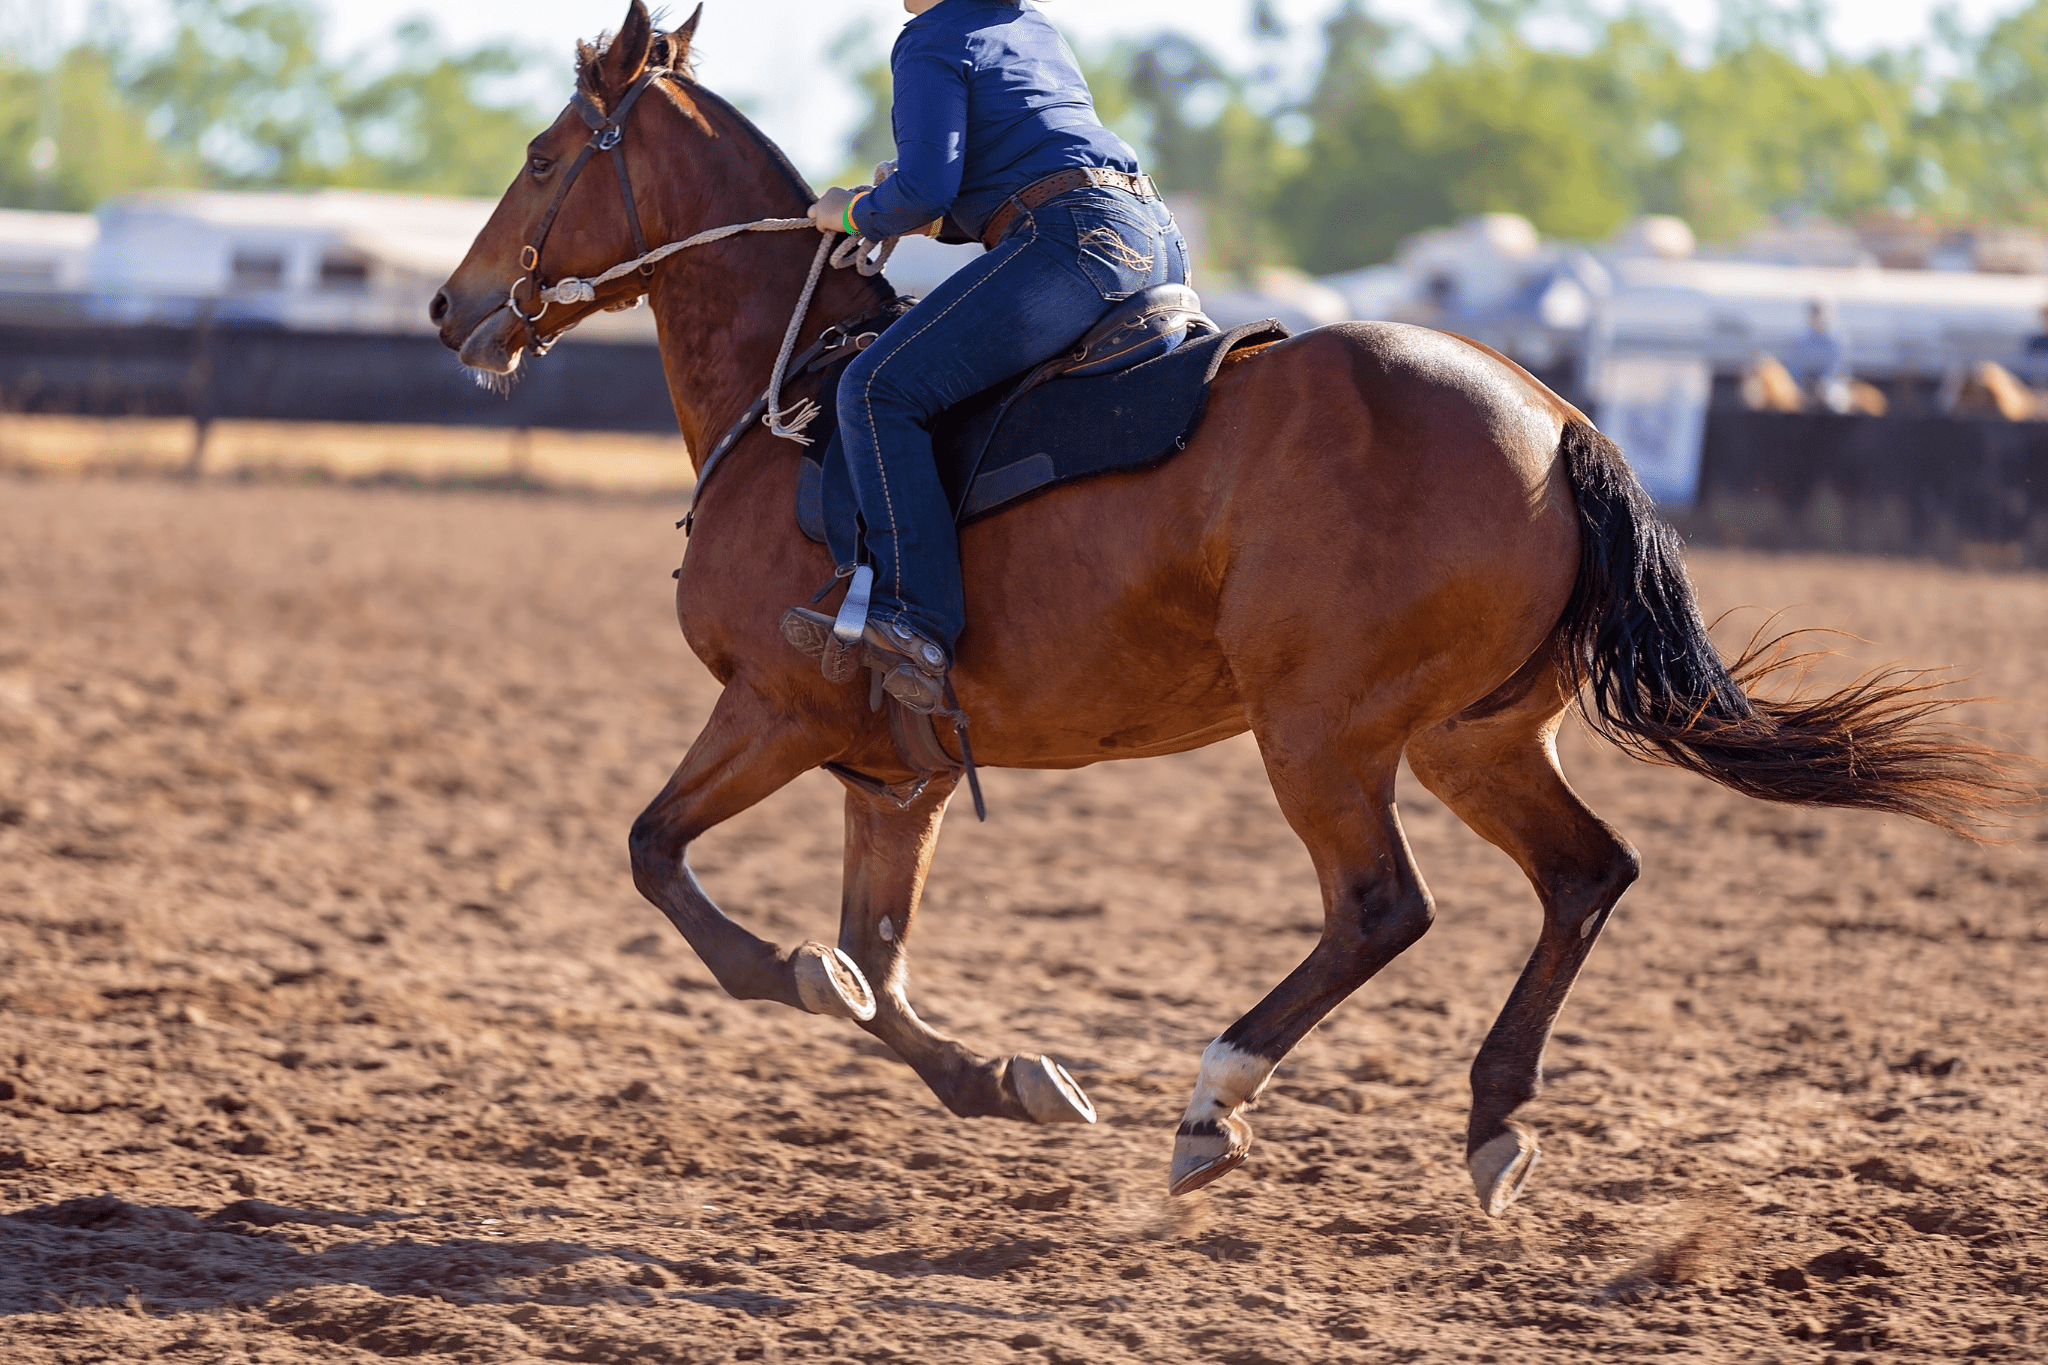 The best Jeans for Horse Riding